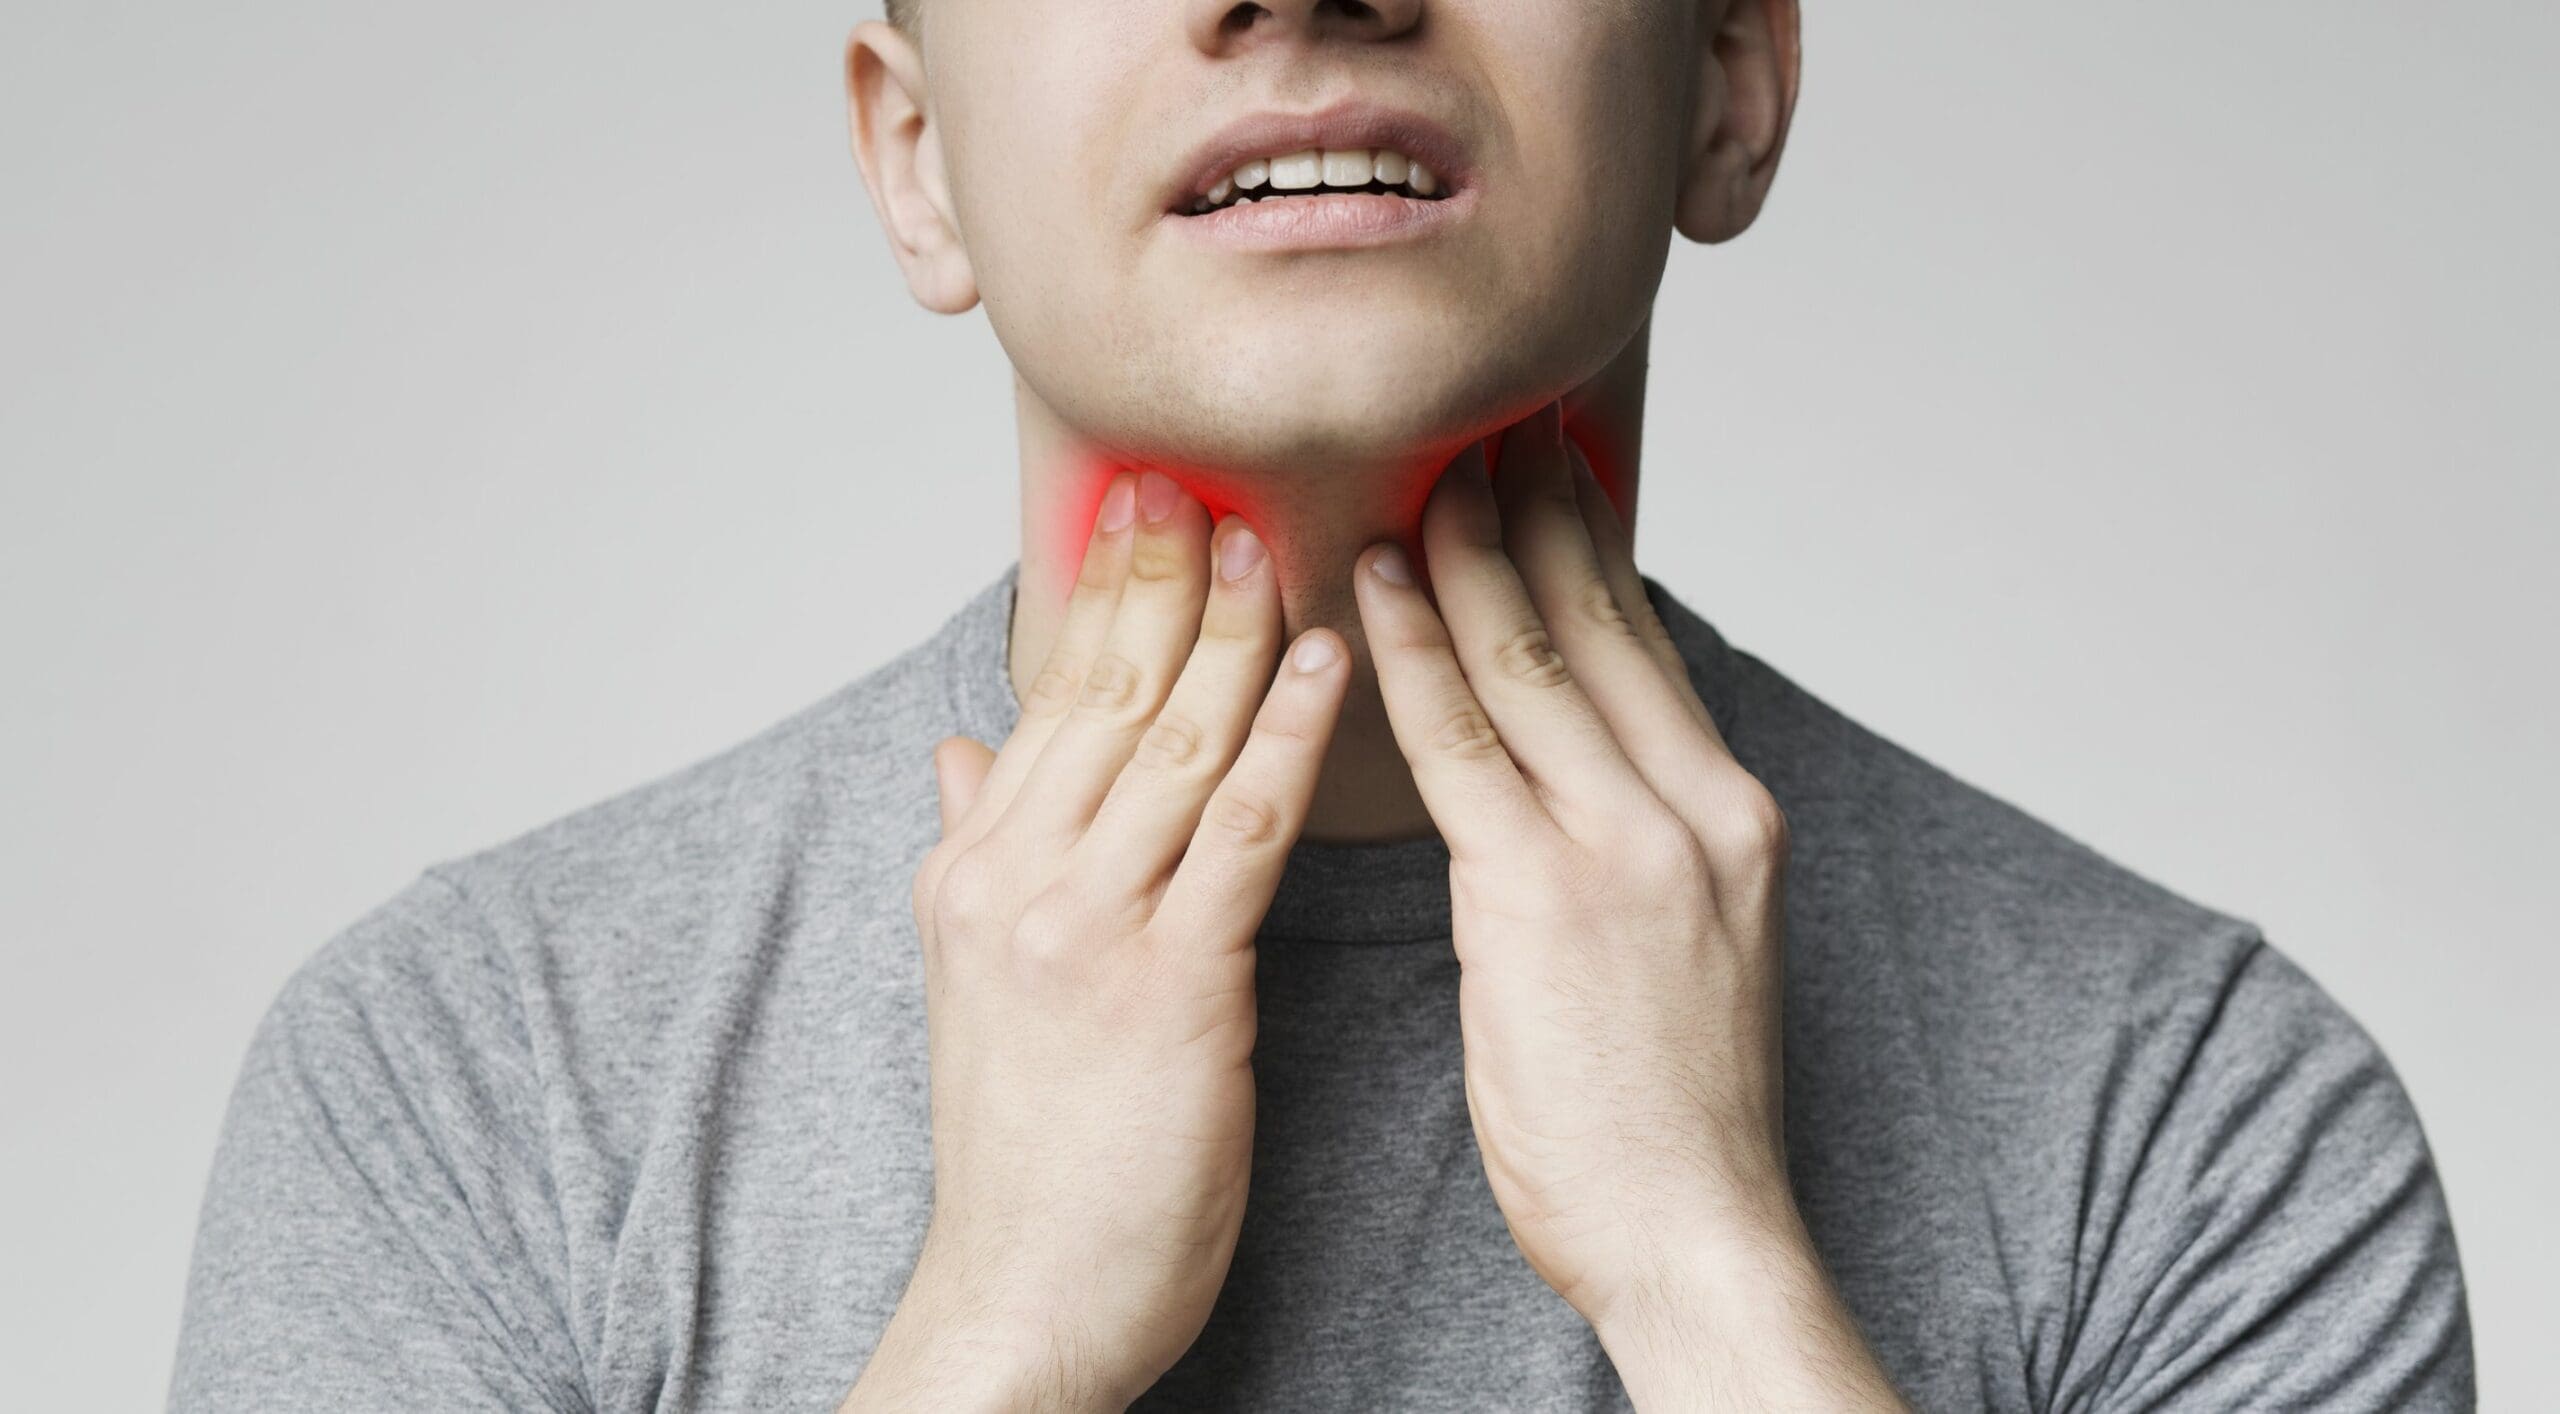 Is there an epidemic of throat cancer in men?